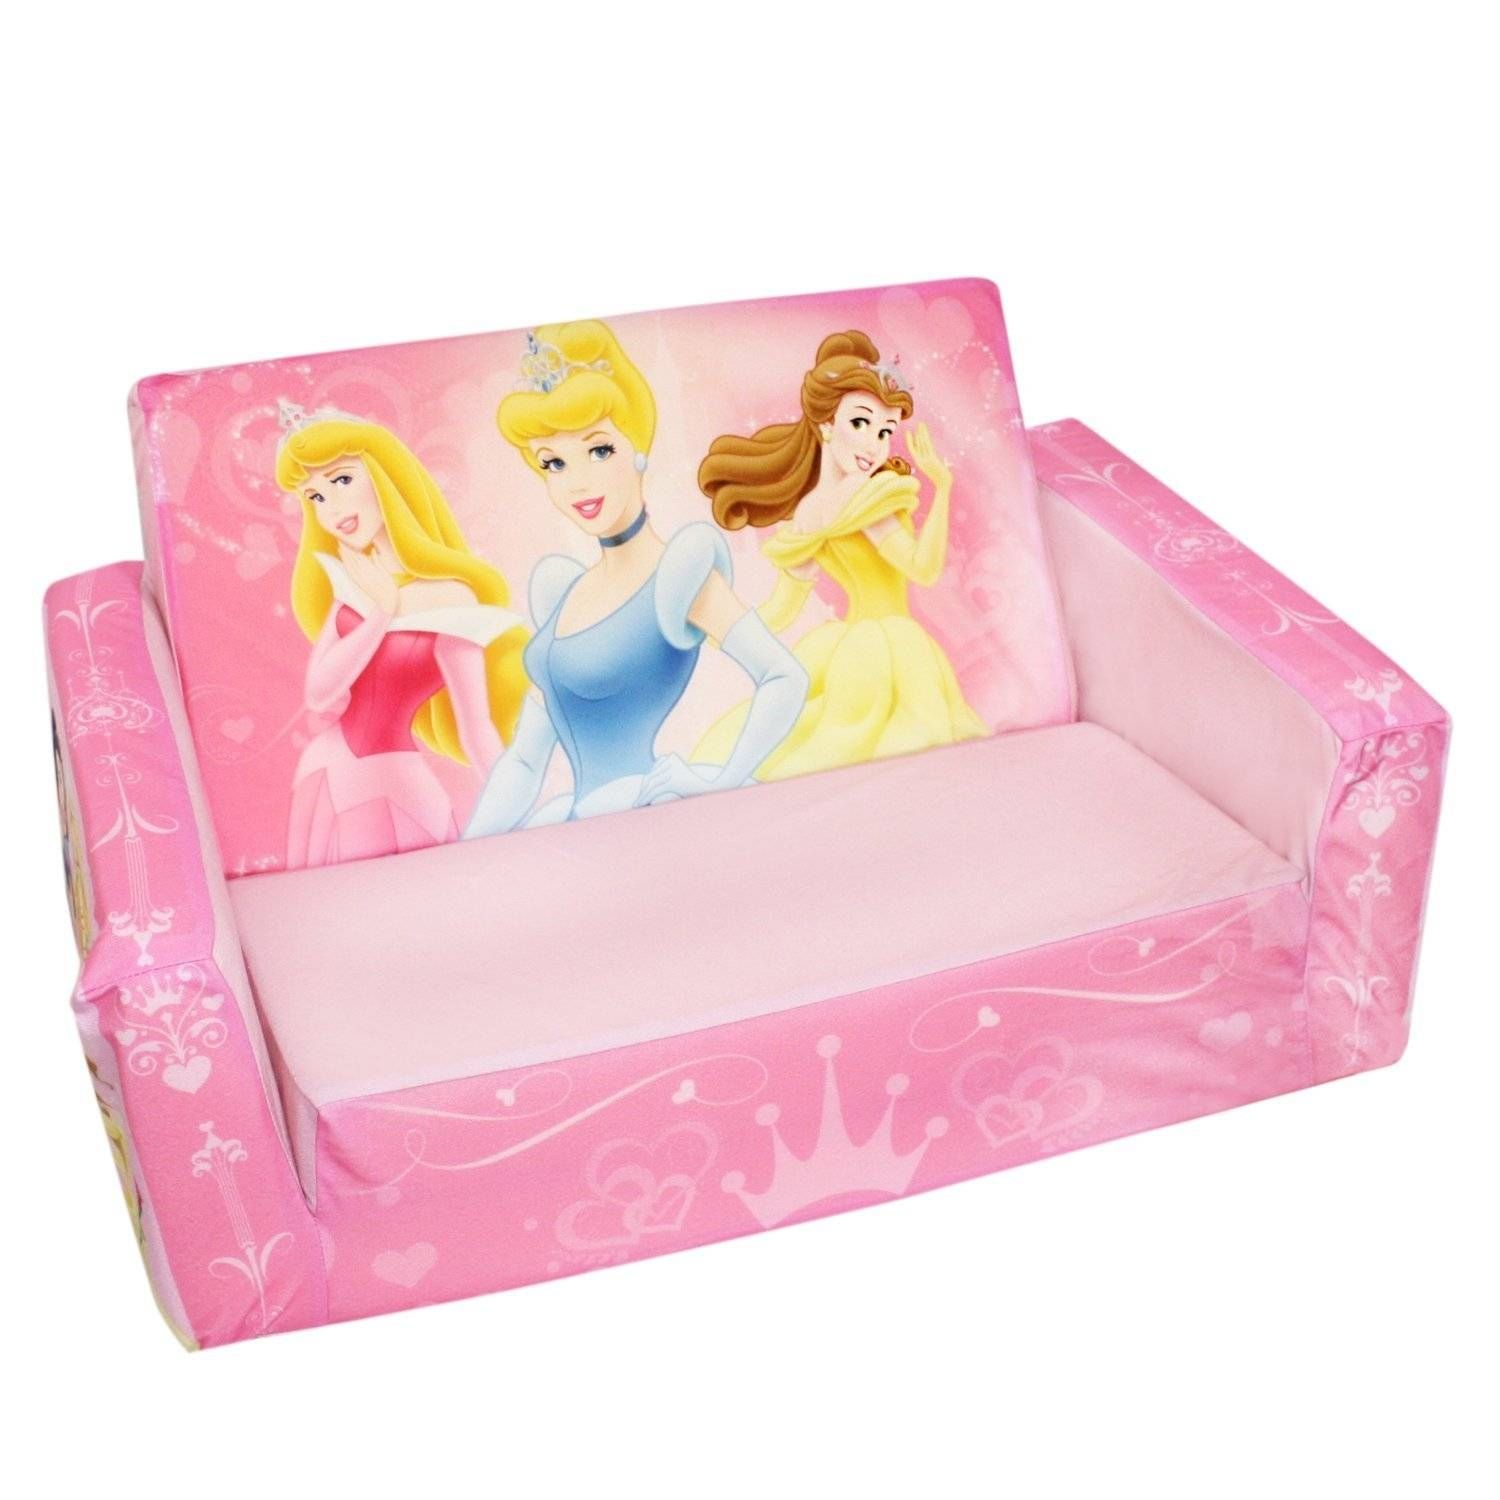 Disney Princess Toddler Couch Bed : Toddler Couch Bed, Charming Within Disney Princess Couches (View 3 of 15)